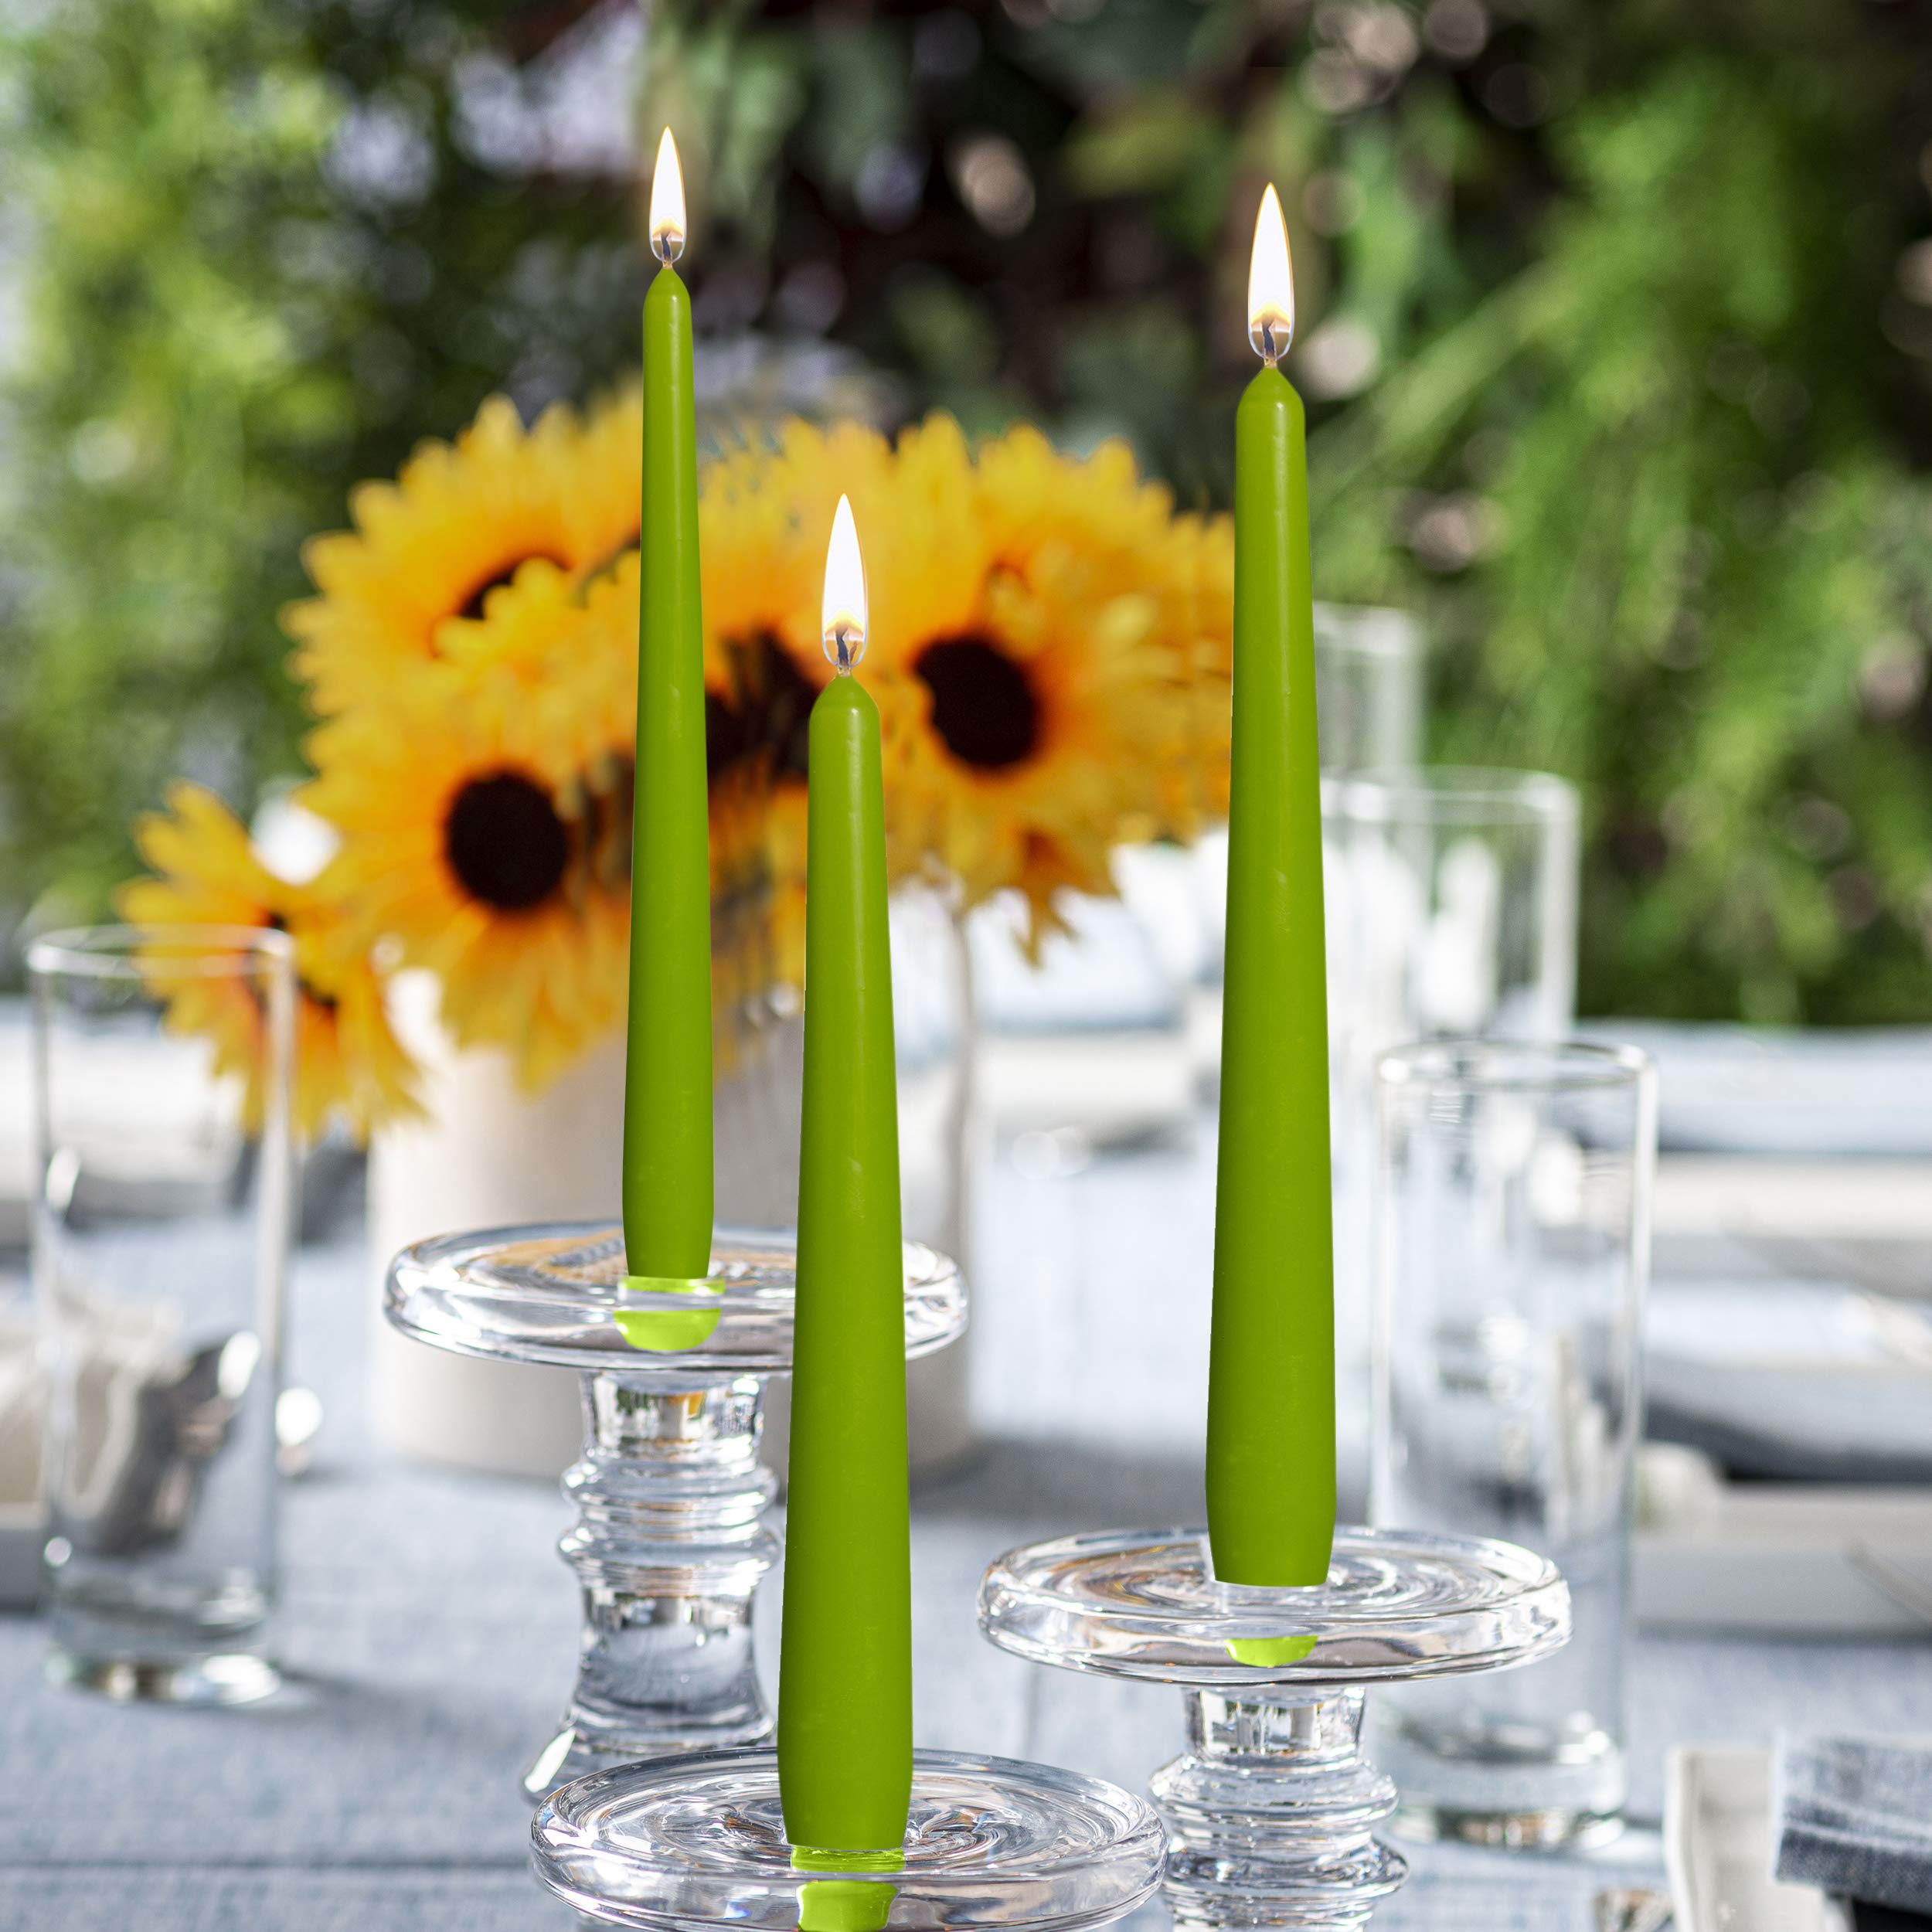 BOLSIUS Lime Green Taper Candles - 12 Pack Individually Wrapped Unscented 10 Inch Dinner Candle Set - 8 Burn Hours - Premium European Quality - Smokeless & Dripless Wedding, Decor & Party Candlesticks  - Like New